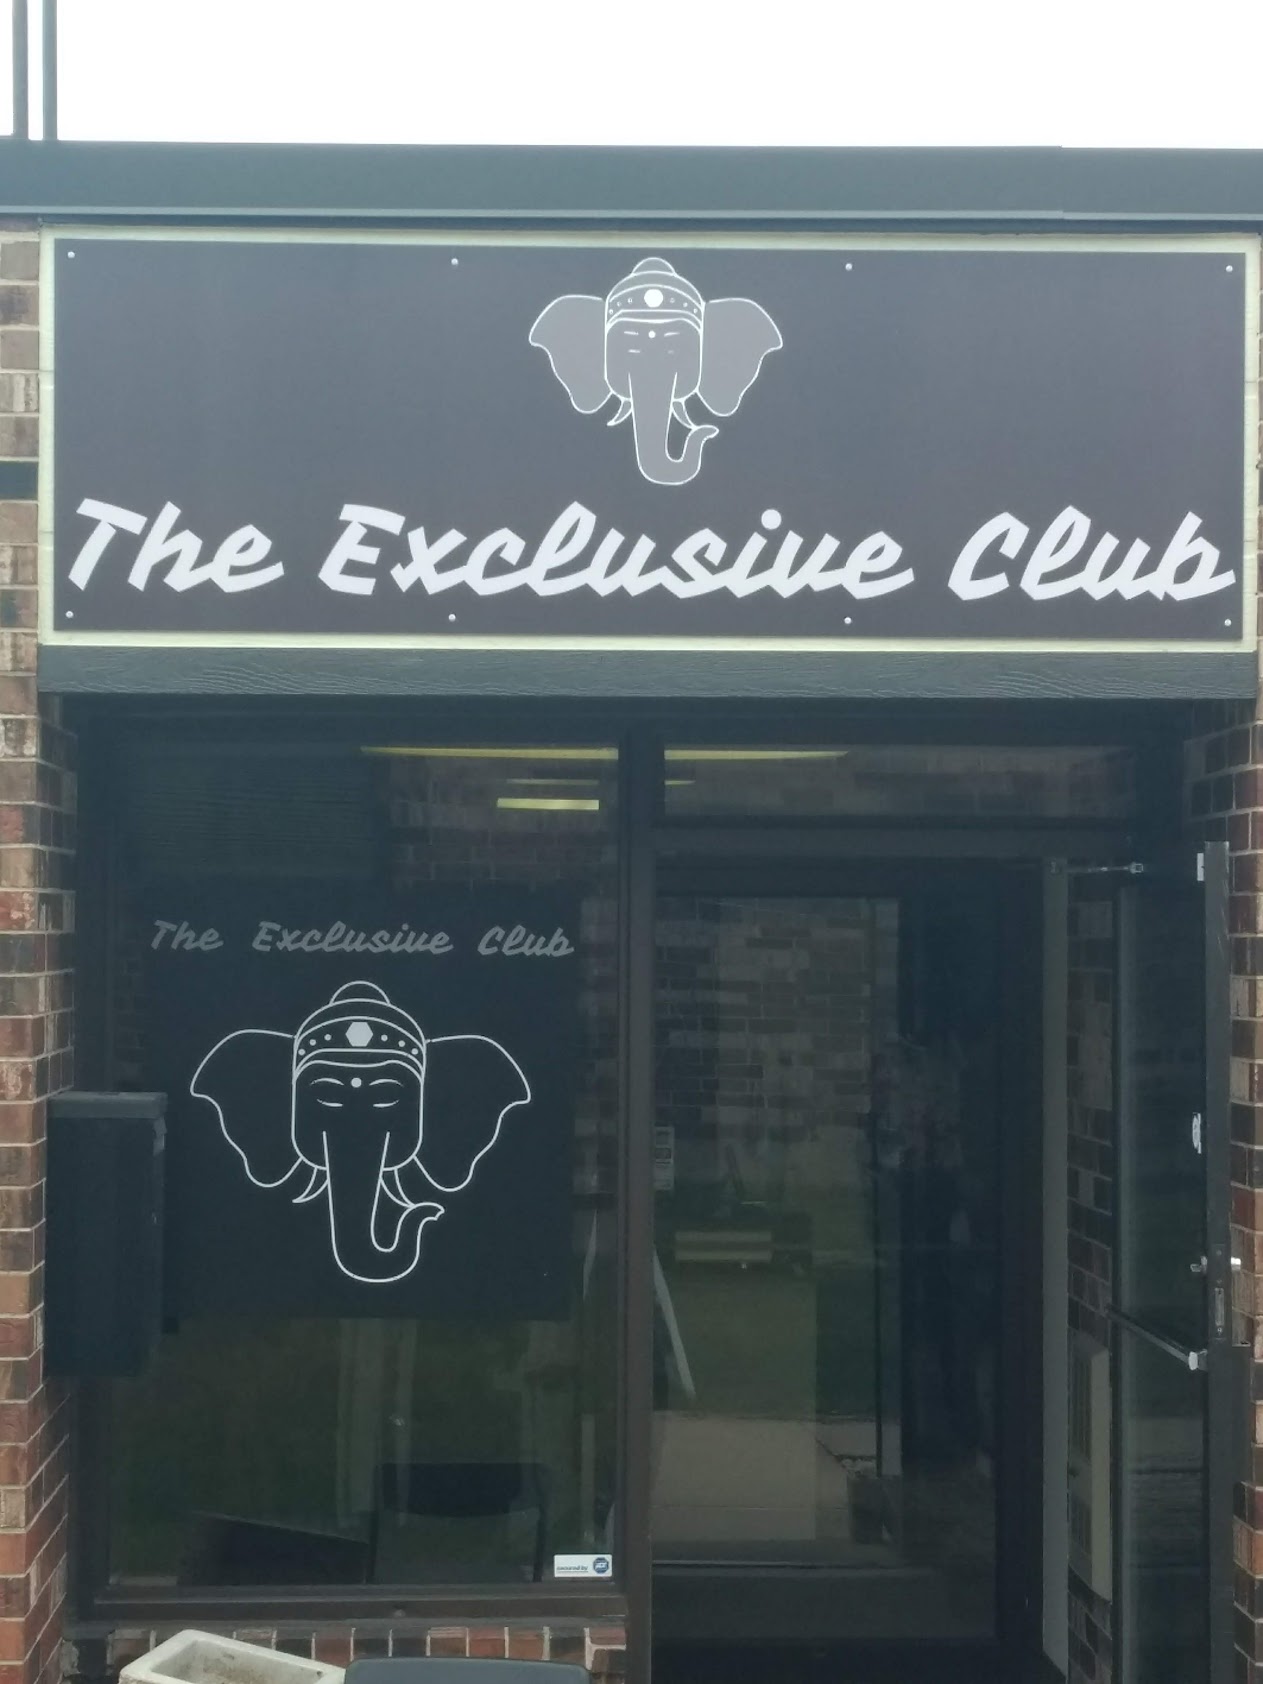 The Exclusive Club